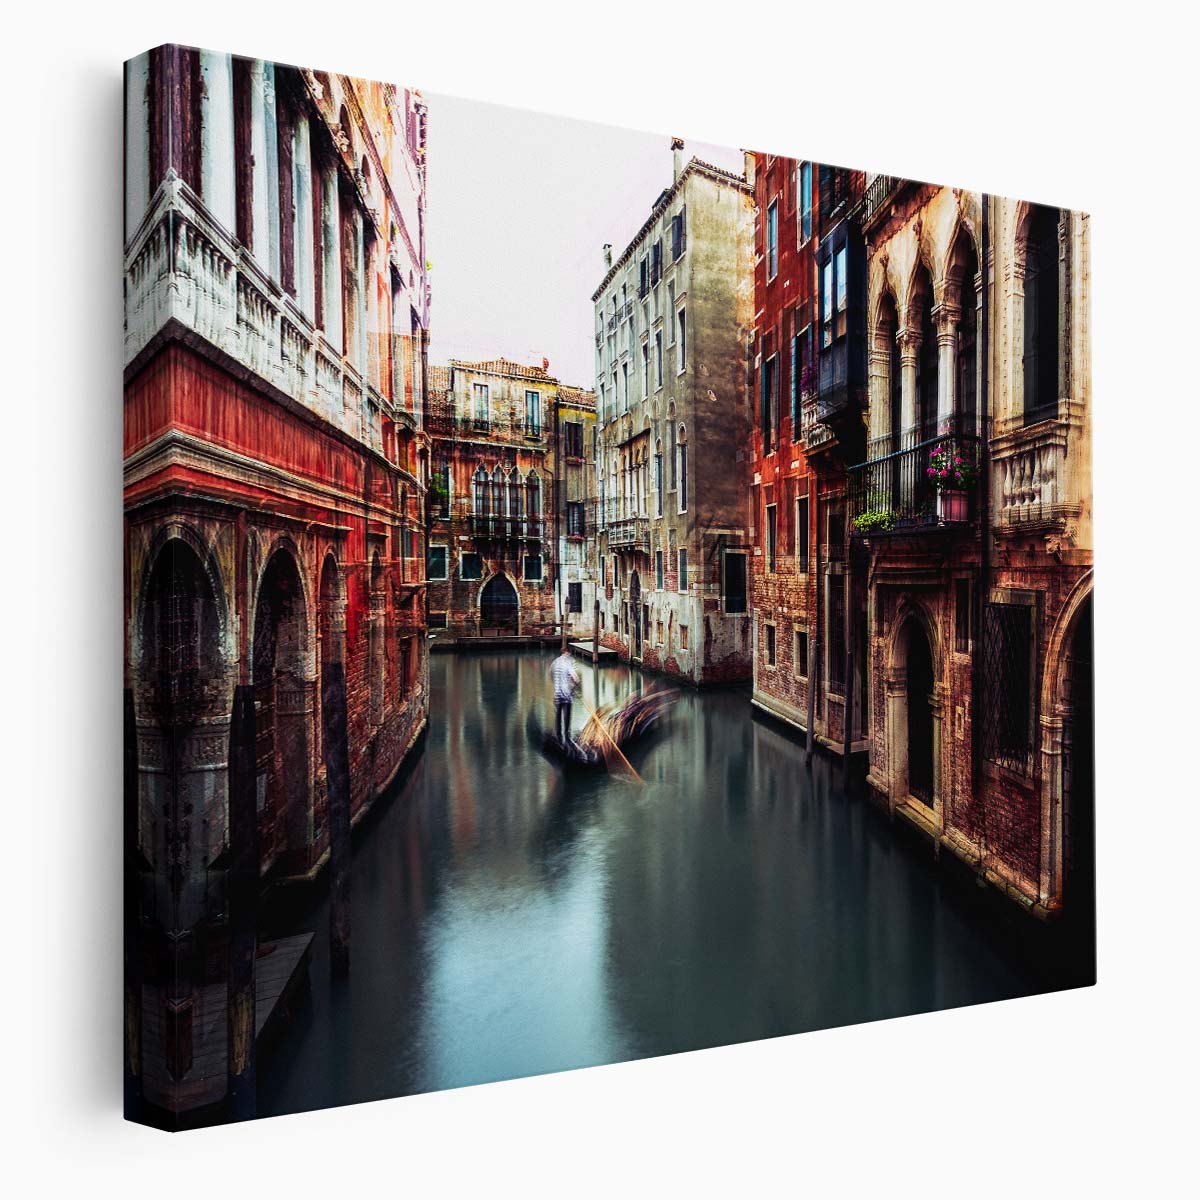 Venice Gondola Journey Historic Italy Canal Wall Art by Luxuriance Designs. Made in USA.